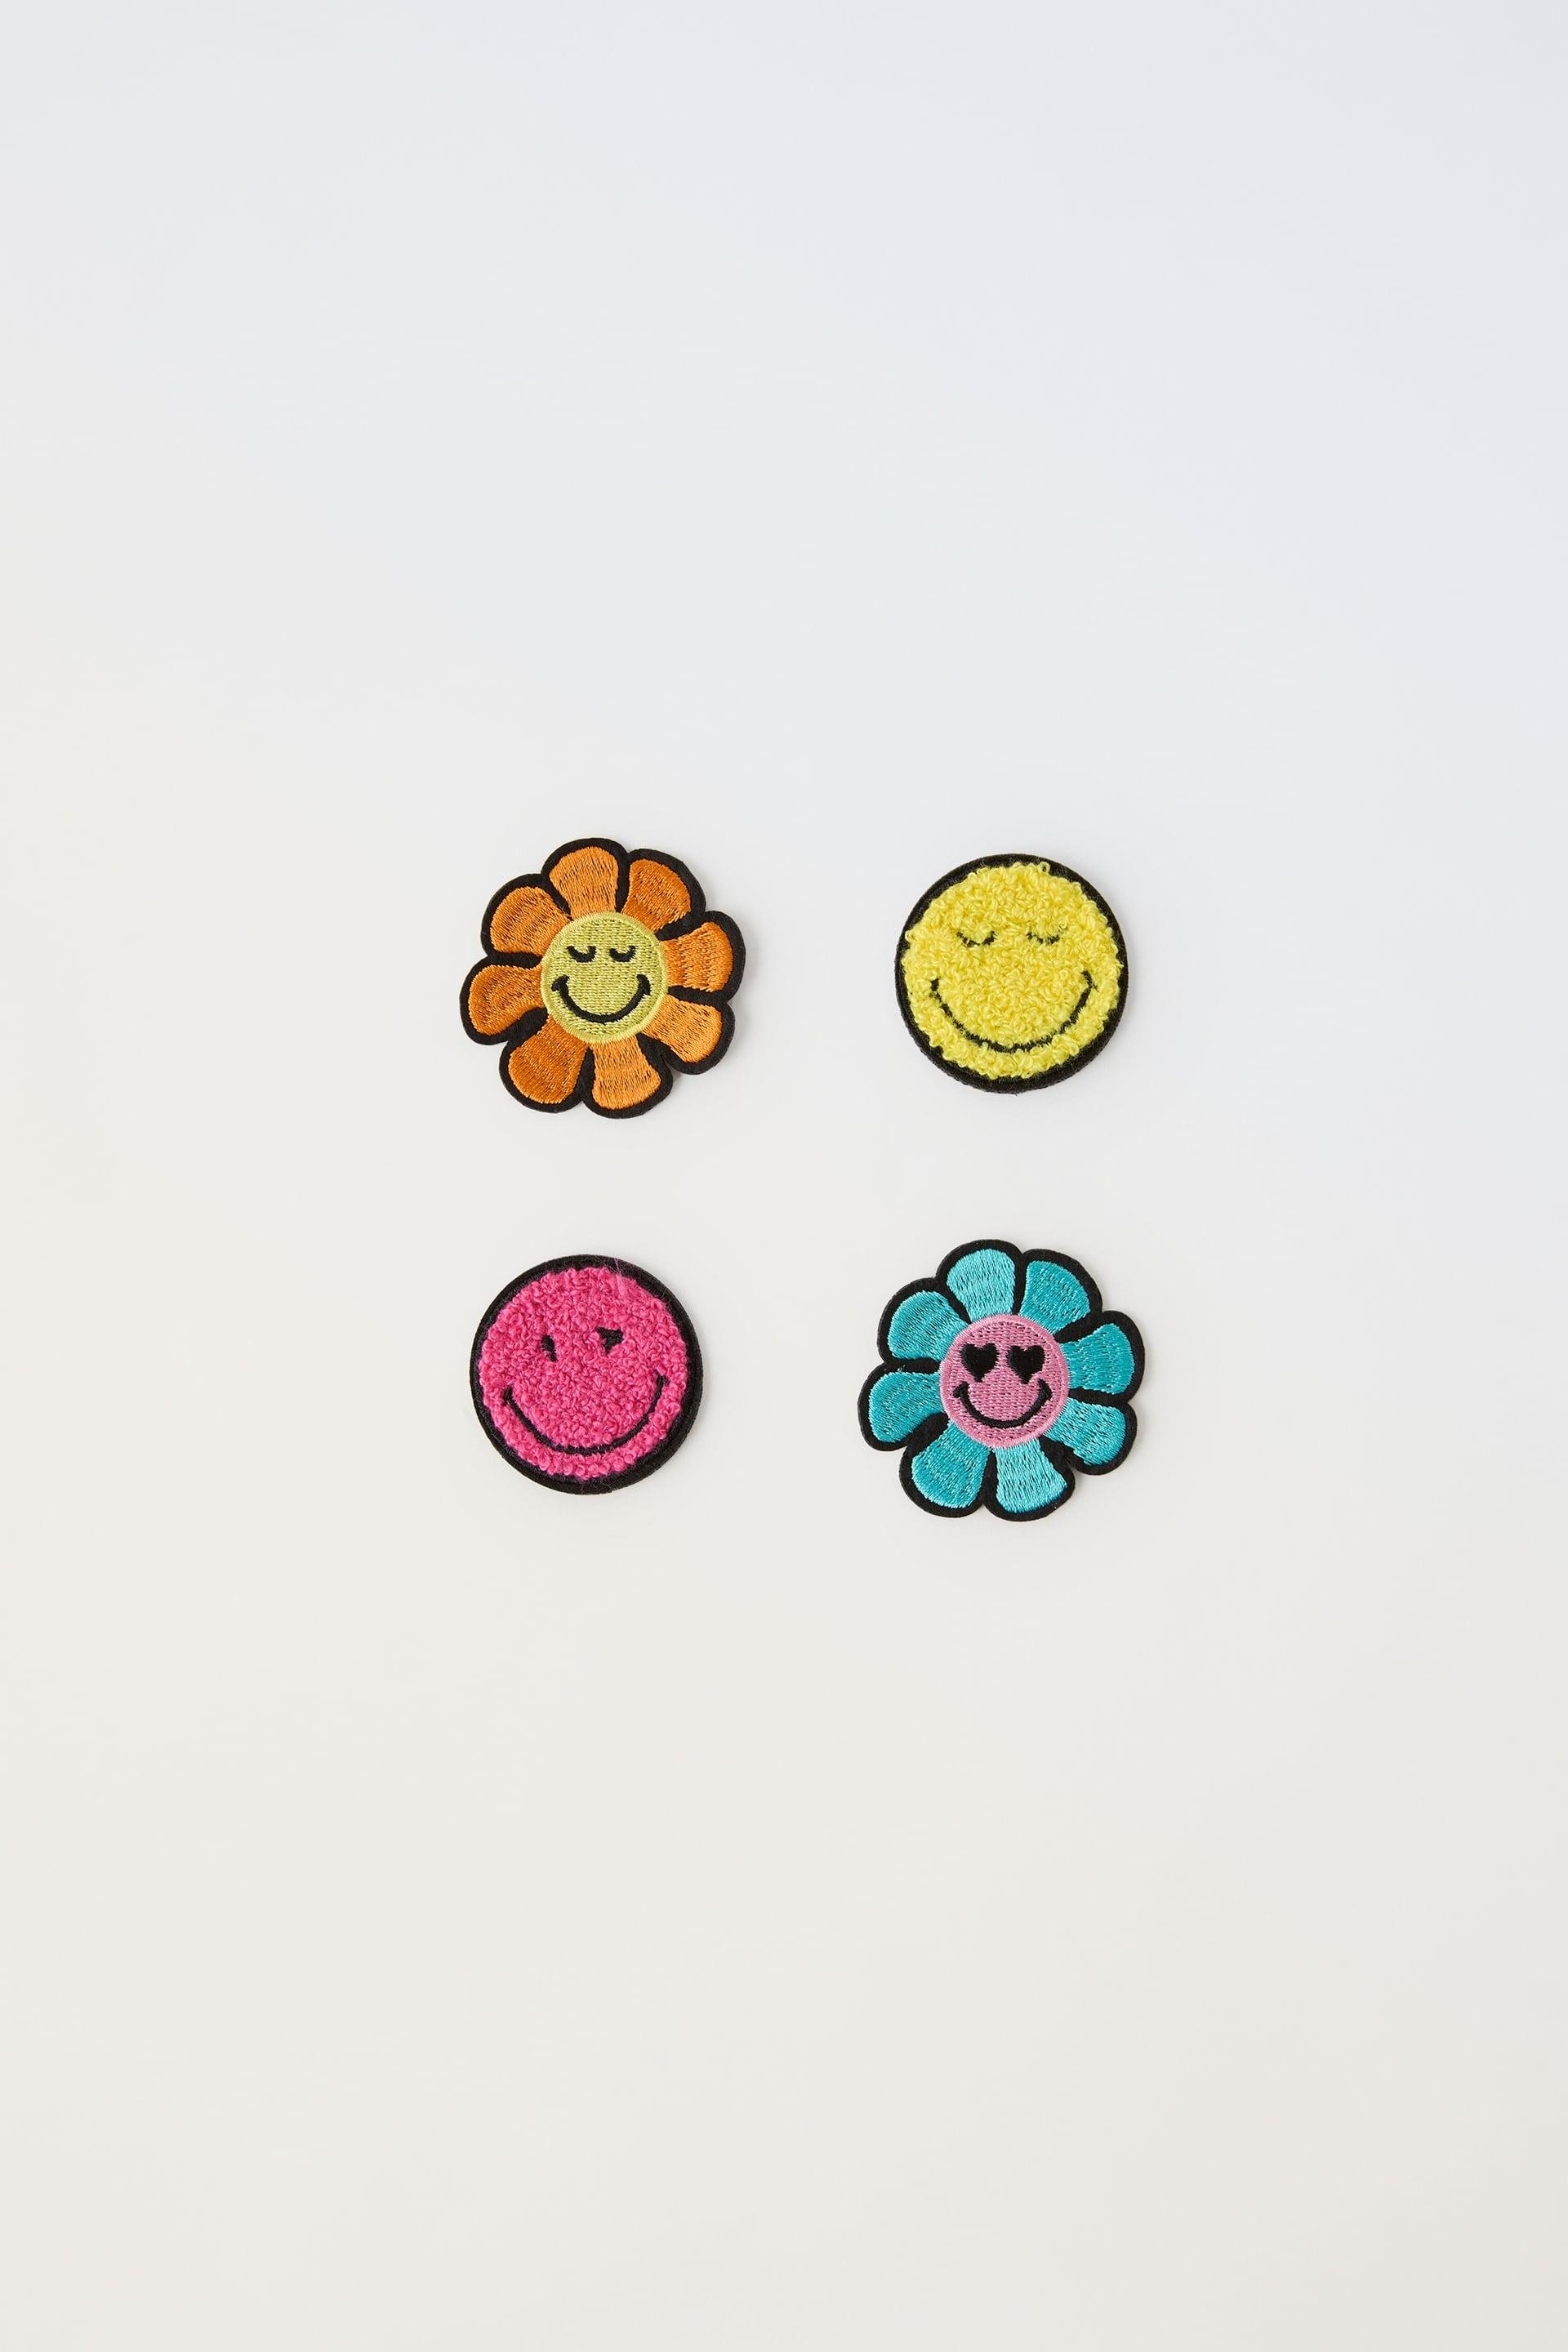 PACK OF FOUR SMILEYWORLD ® IRON-ON PATCHES by ZARA